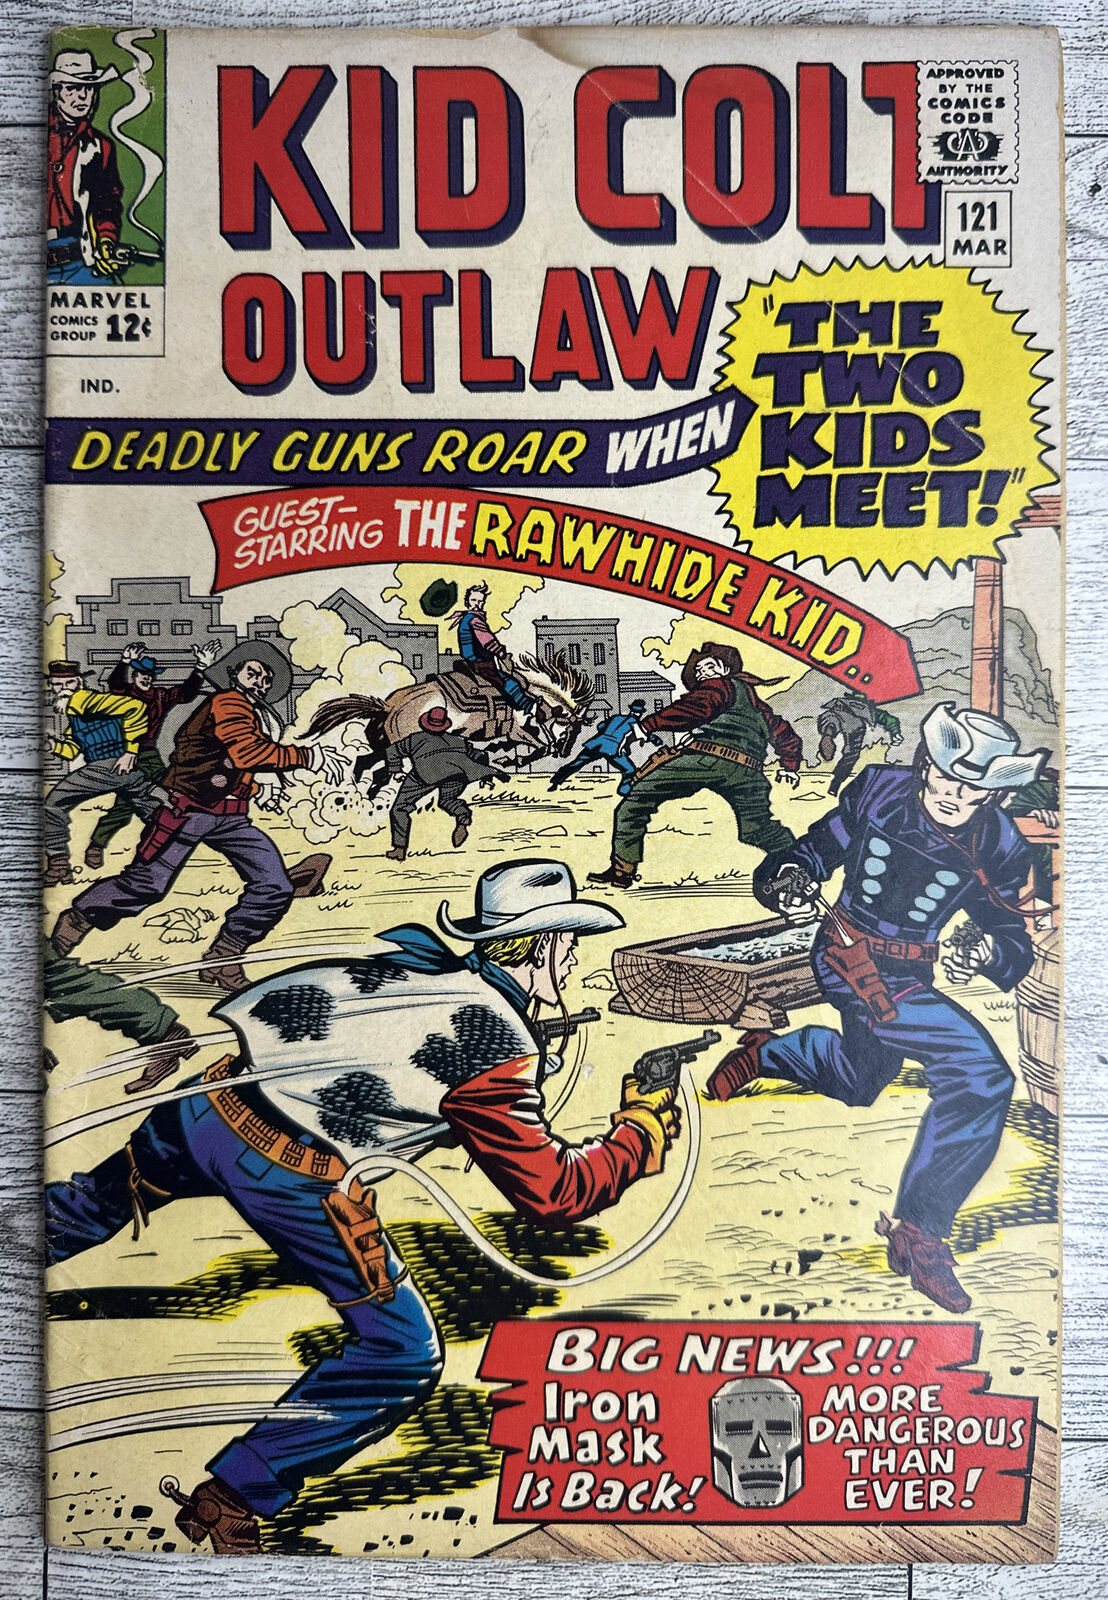 KID COLT OUTLAW COMIC #121 MARCH 1965  SILVER AGE Rawhide Kid